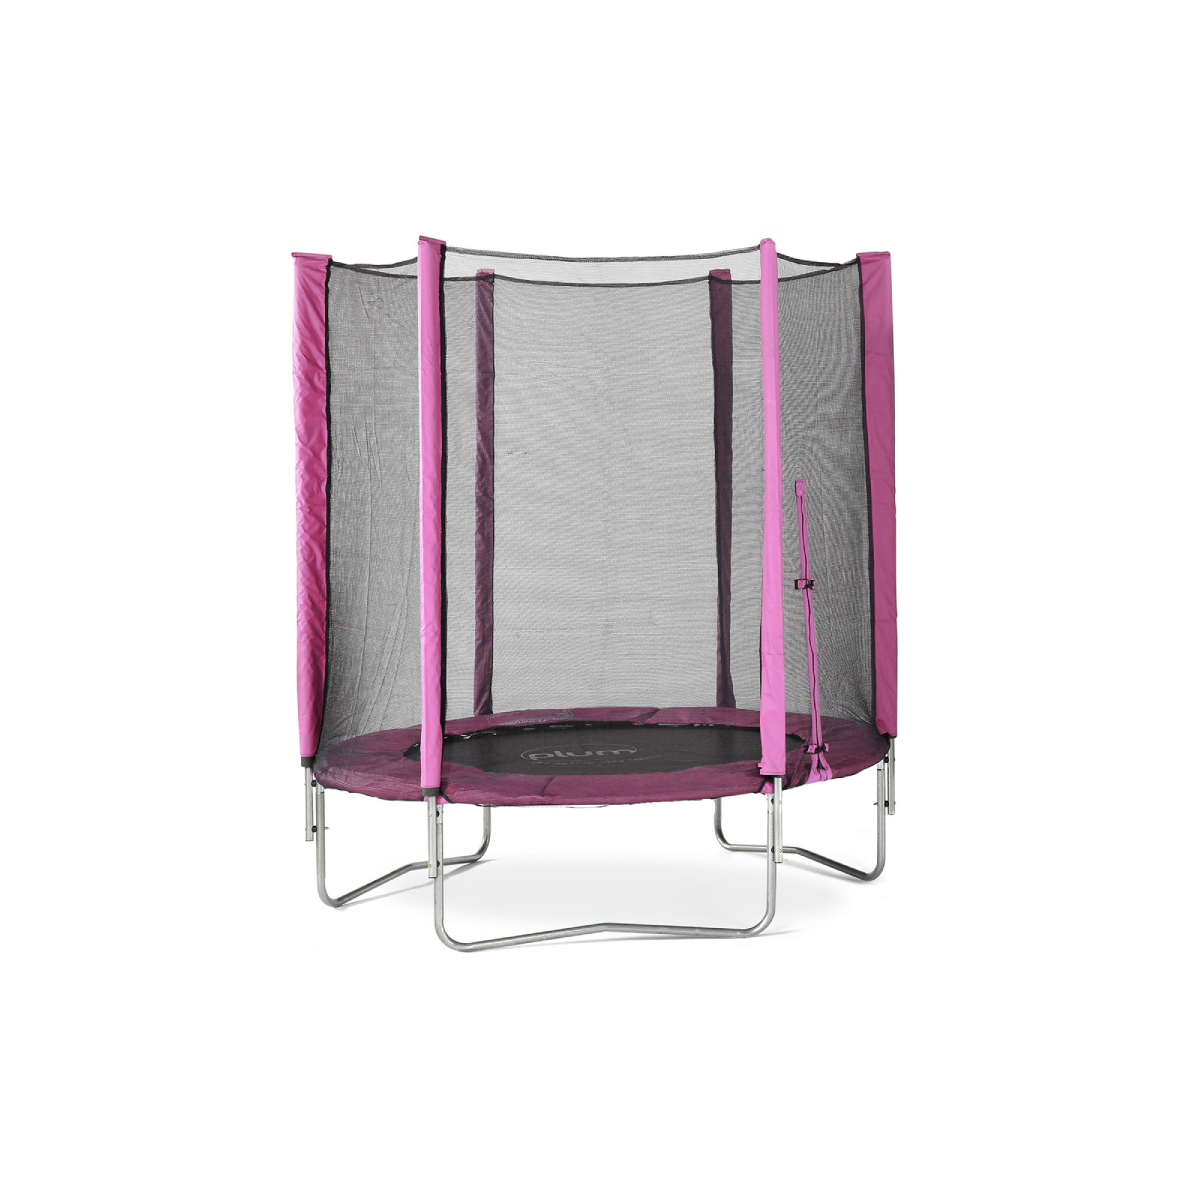 Plum Play 6ft Trampoline and Enclosure